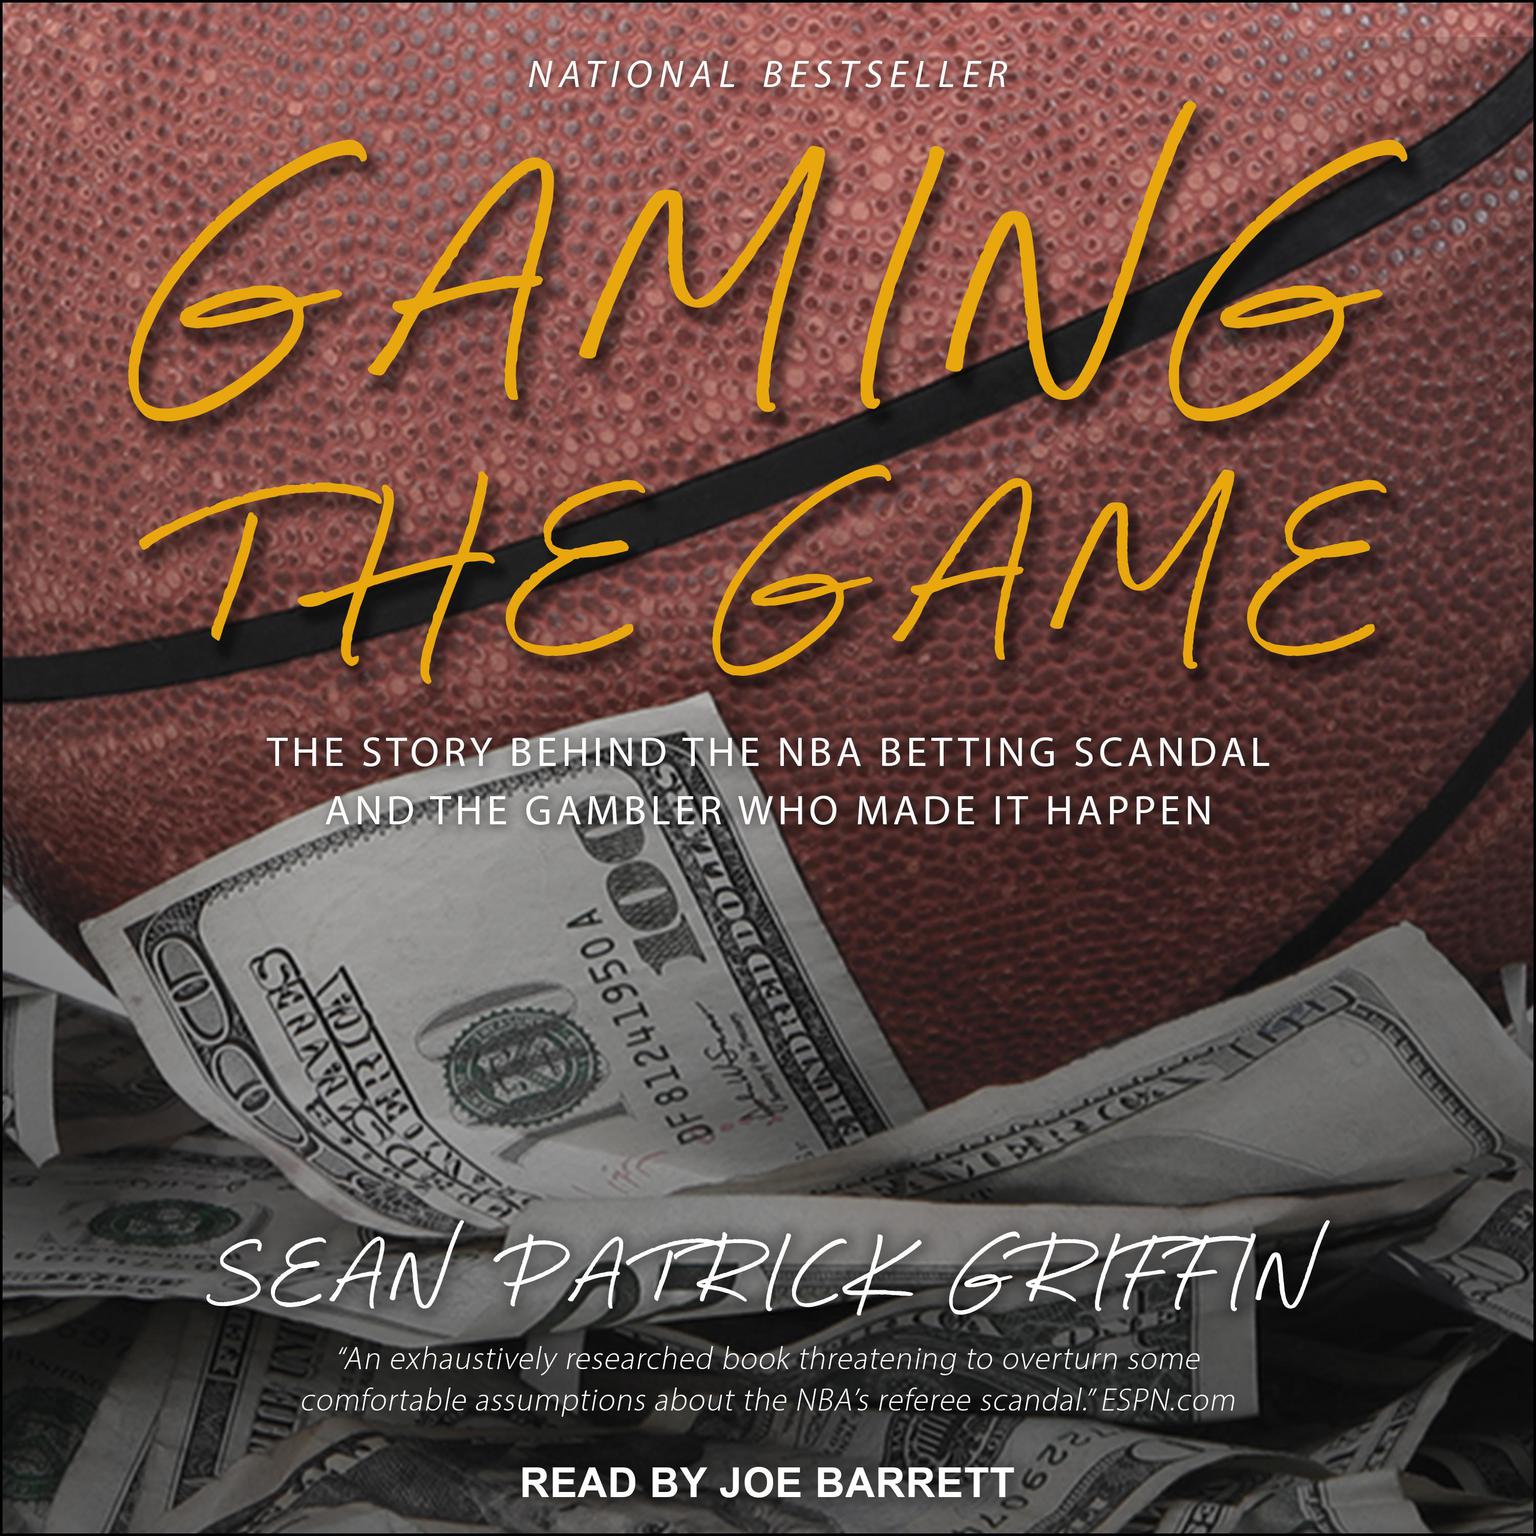 Gaming the Game: The Story Behind the NBA Betting Scandal and the Gambler Who Made It Happen Audiobook, by Sean Patrick Griffin